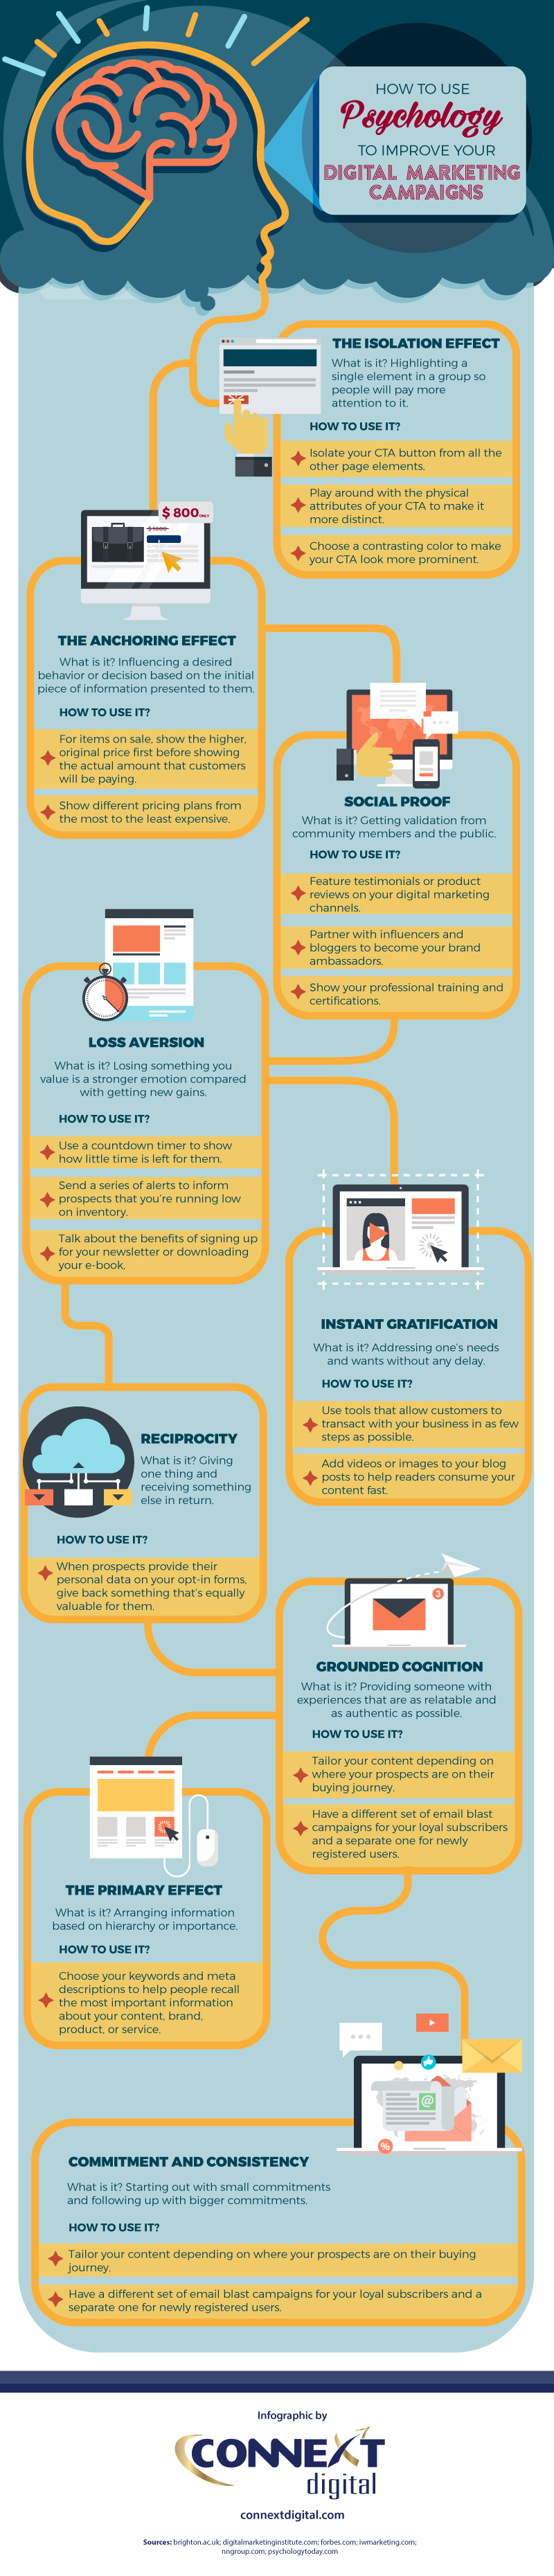 How to Use Psychology to Improve Your Digital Marketing Campaign - Infographic